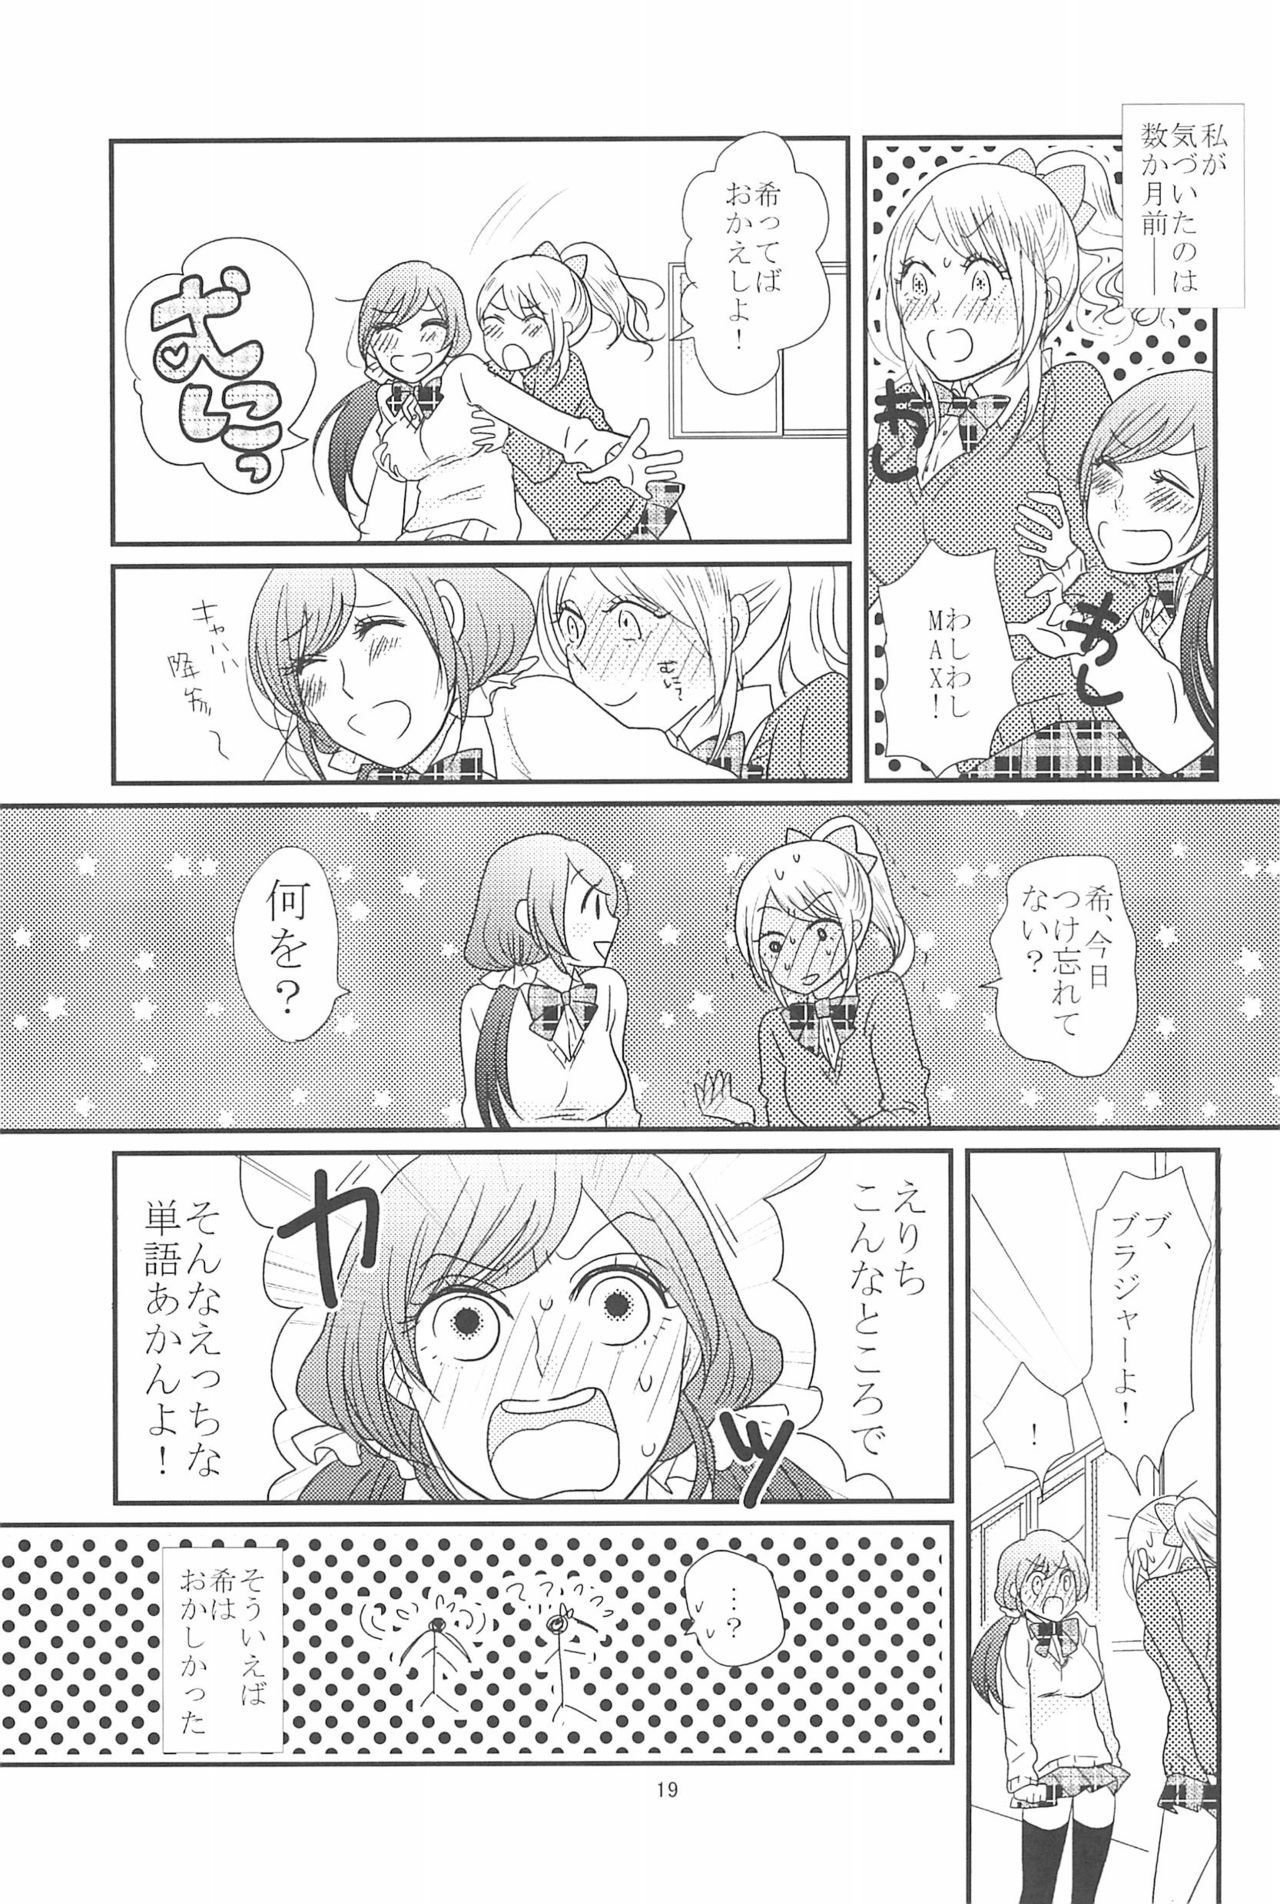 (C90) [BK*N2 (Mikawa Miso)] HAPPY GO LUCKY DAYS (Love Live!) page 23 full